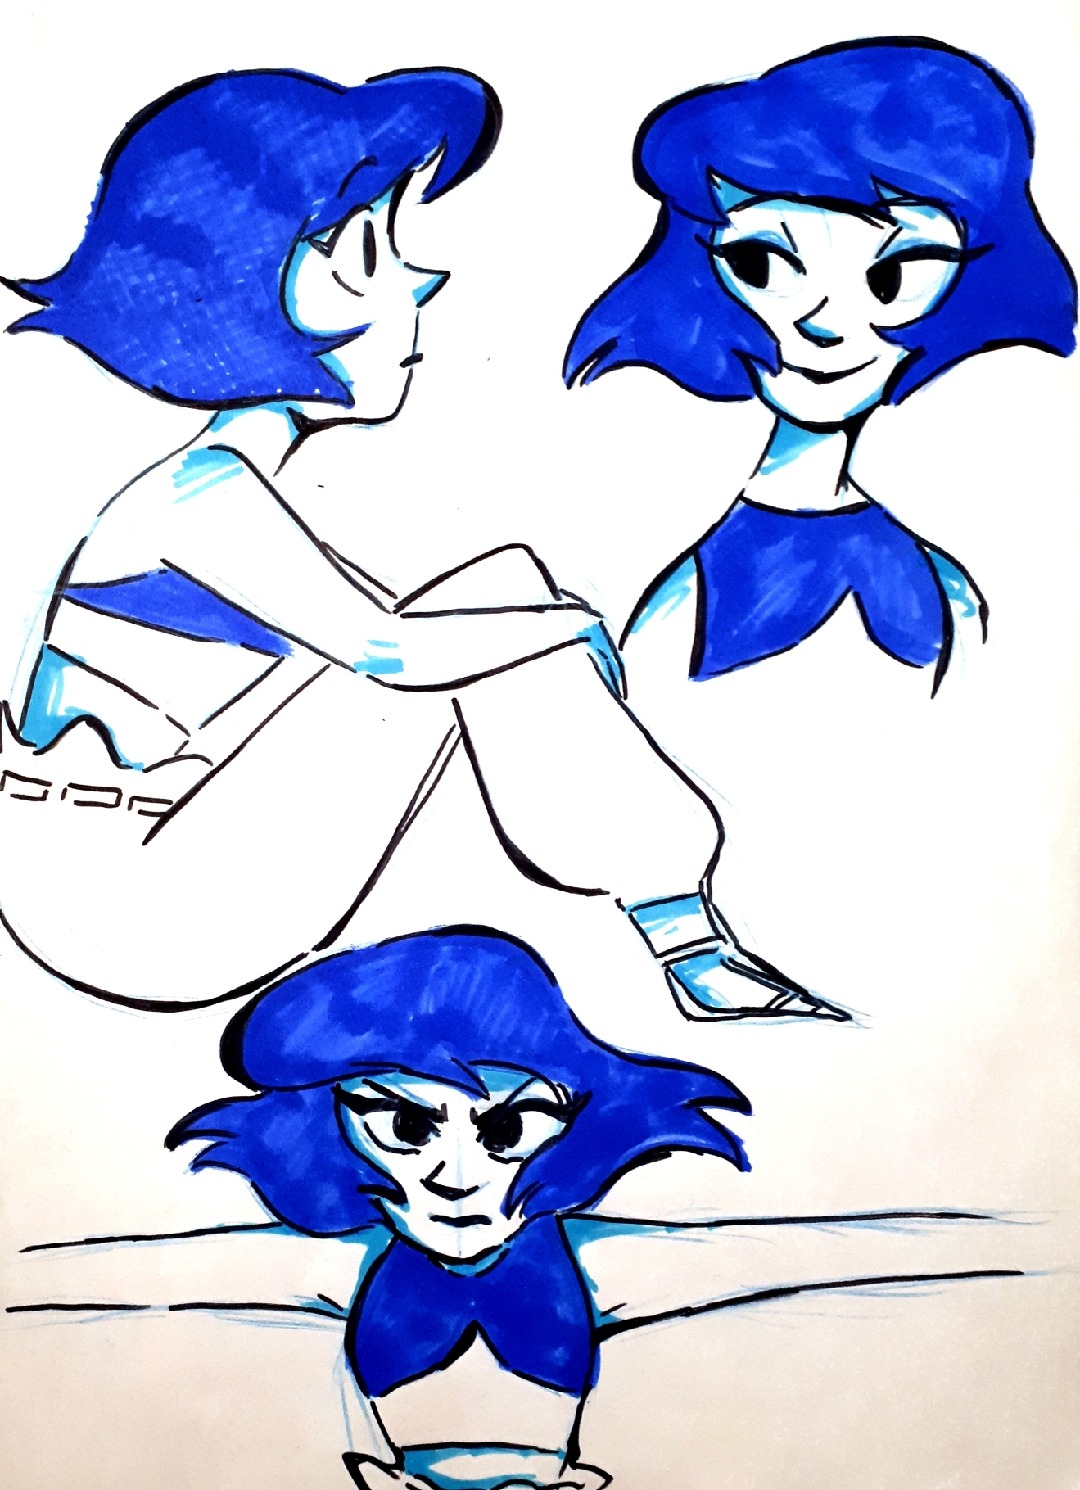 Wanted to draw lapis again. It’s been a while !